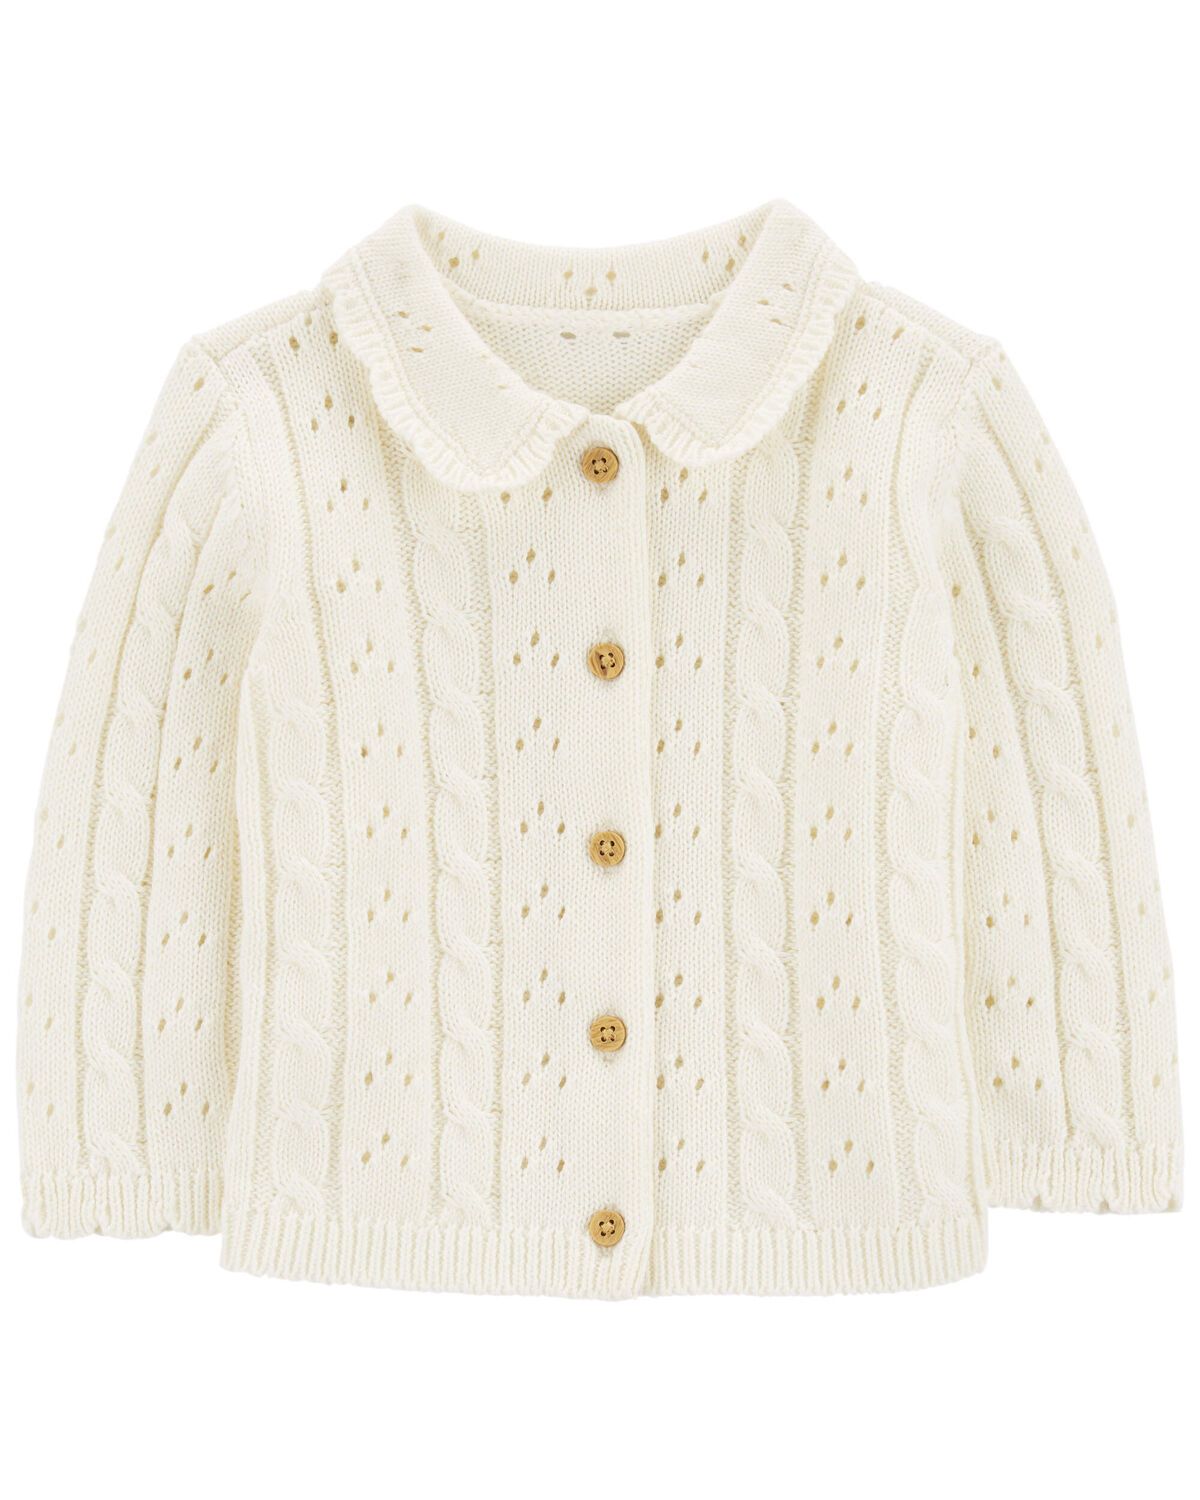 Cream Baby Pointelle Button-Front Sweater Knit Cardigan | carters.com | Carter's